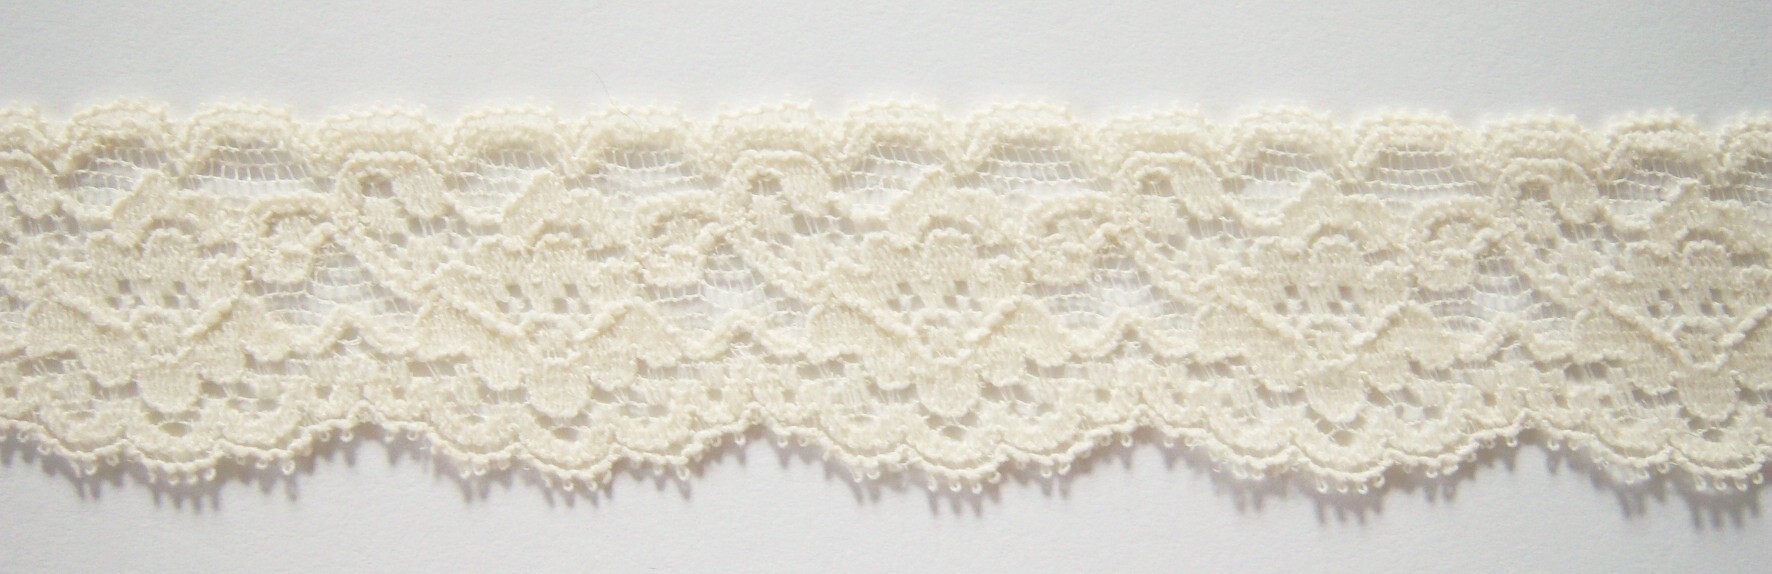 Candlelight 1 3/8" Stretch Lace